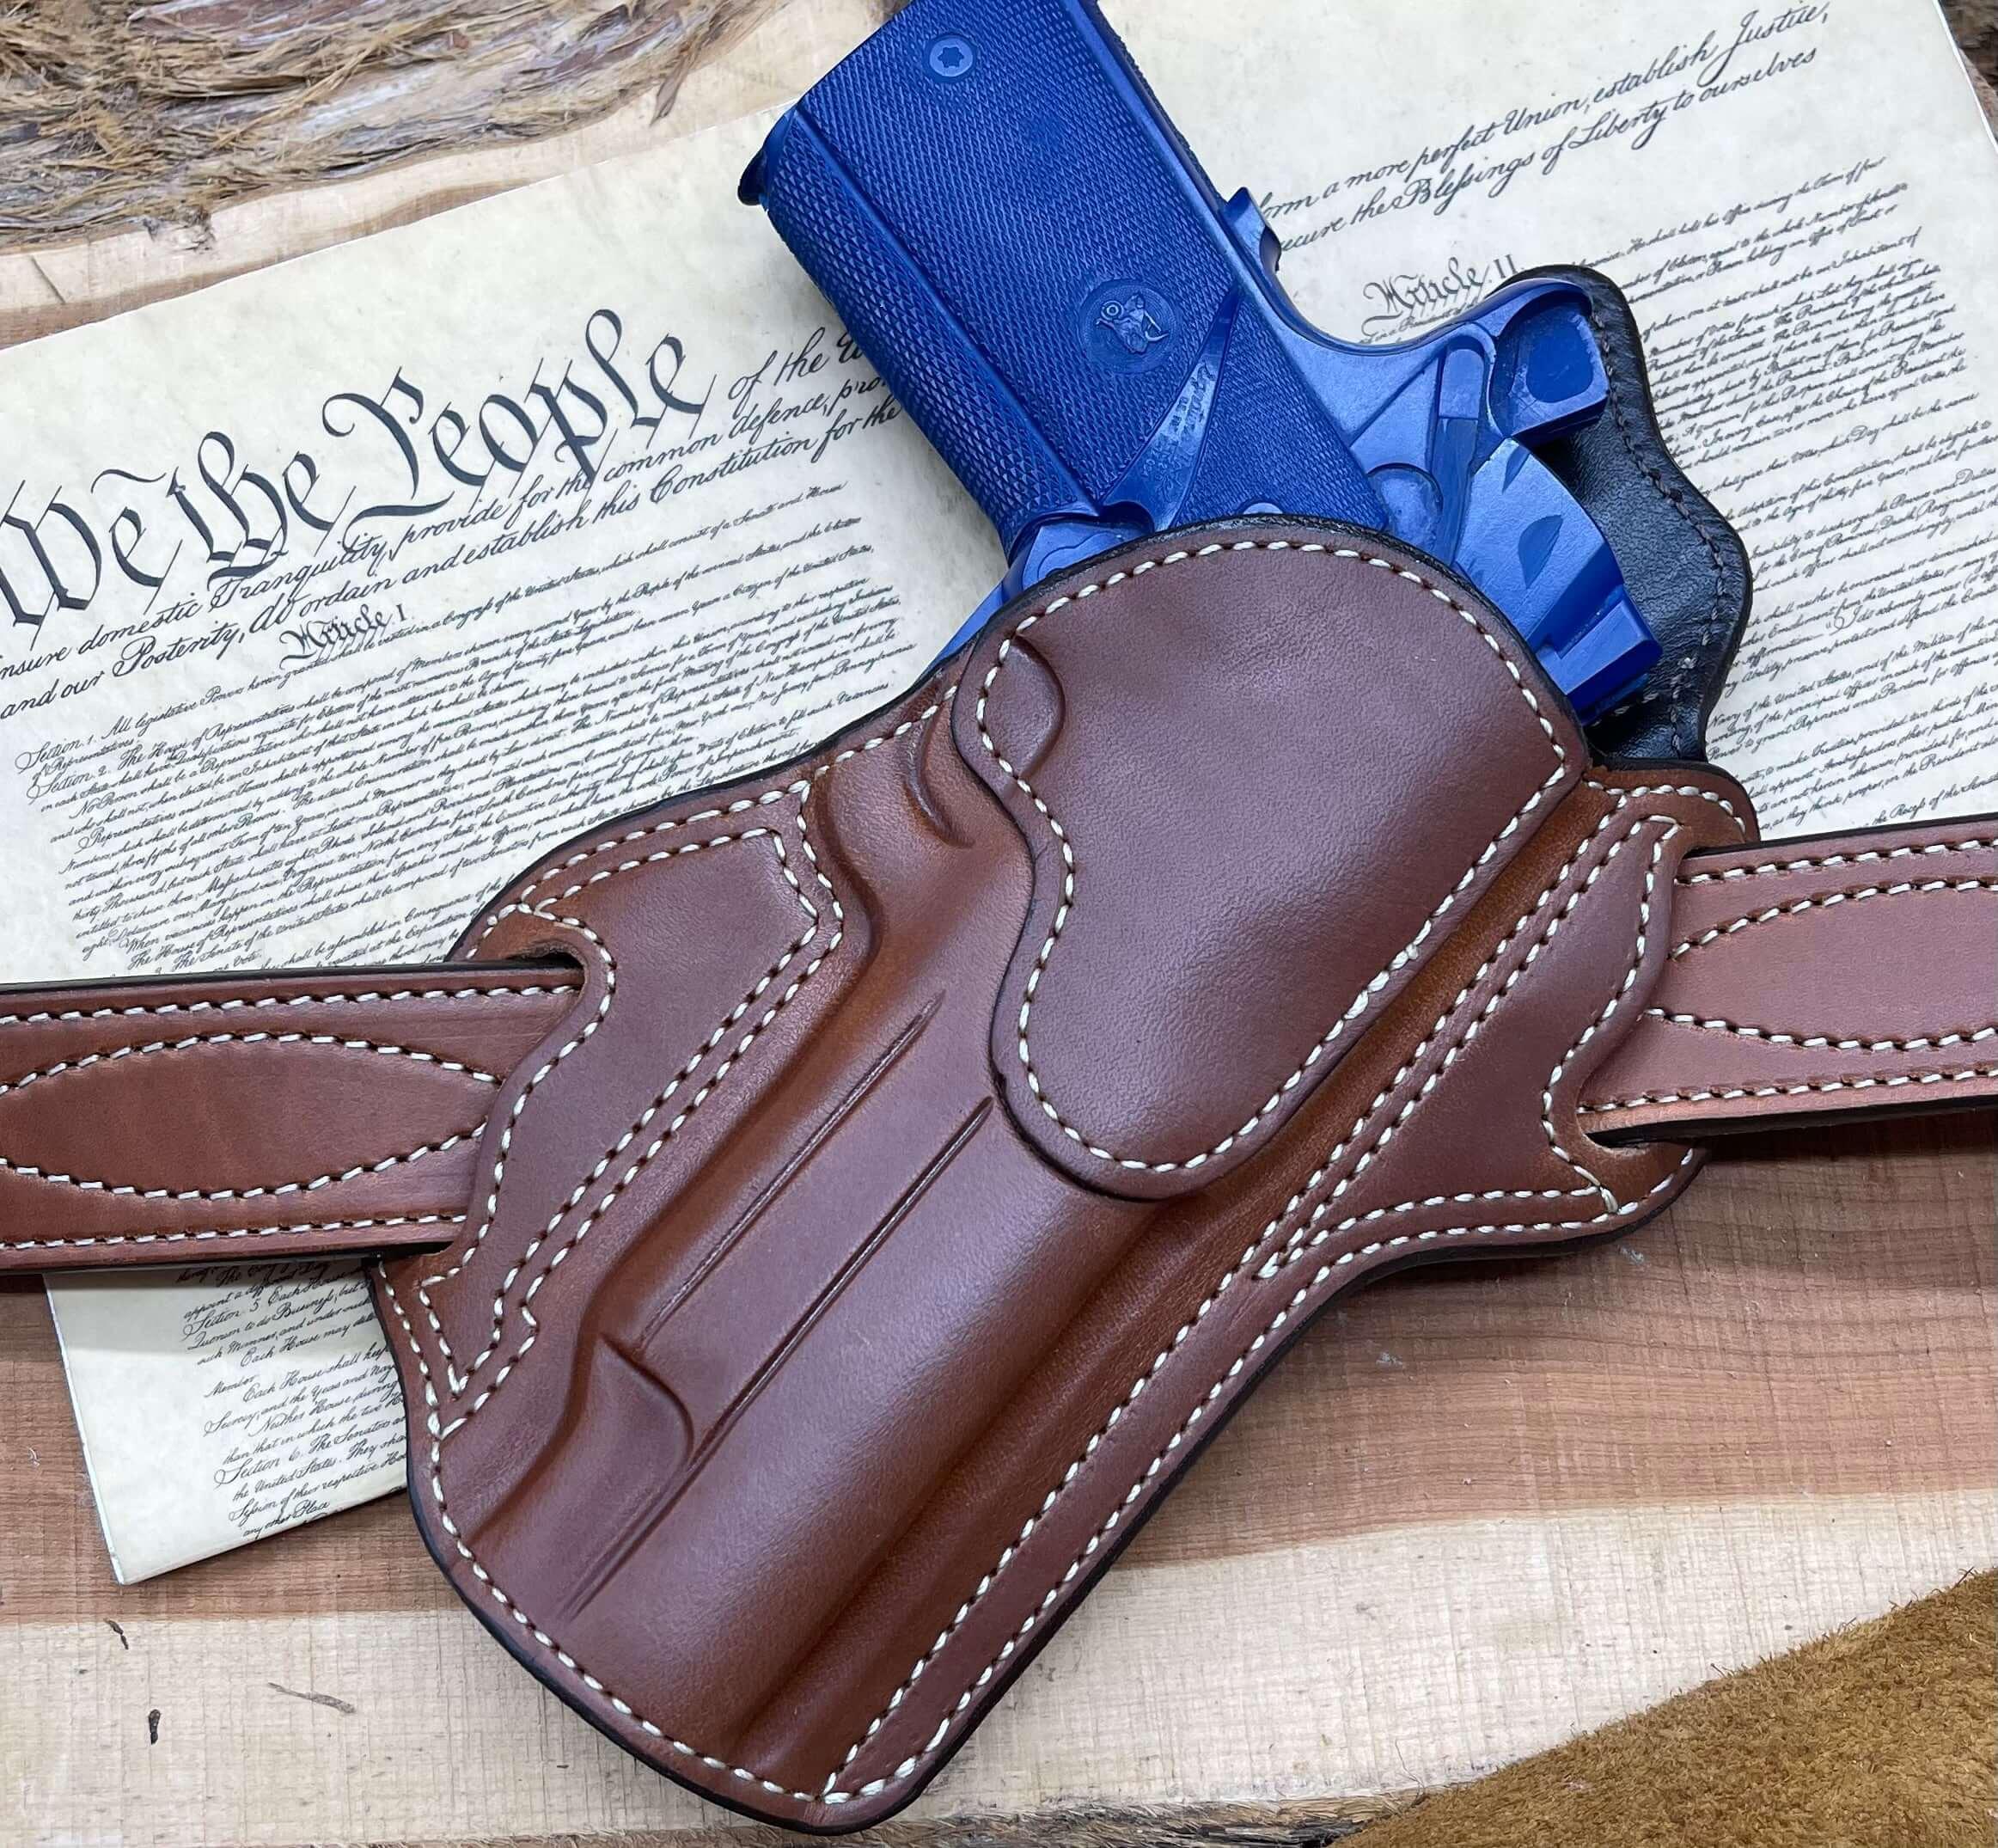 *In Stock* RH Texas Bodyguard Holster Springfield 1911 Operator 5" Rail Saddle Oil Finish w/Natural Stitching - Busted B Leather